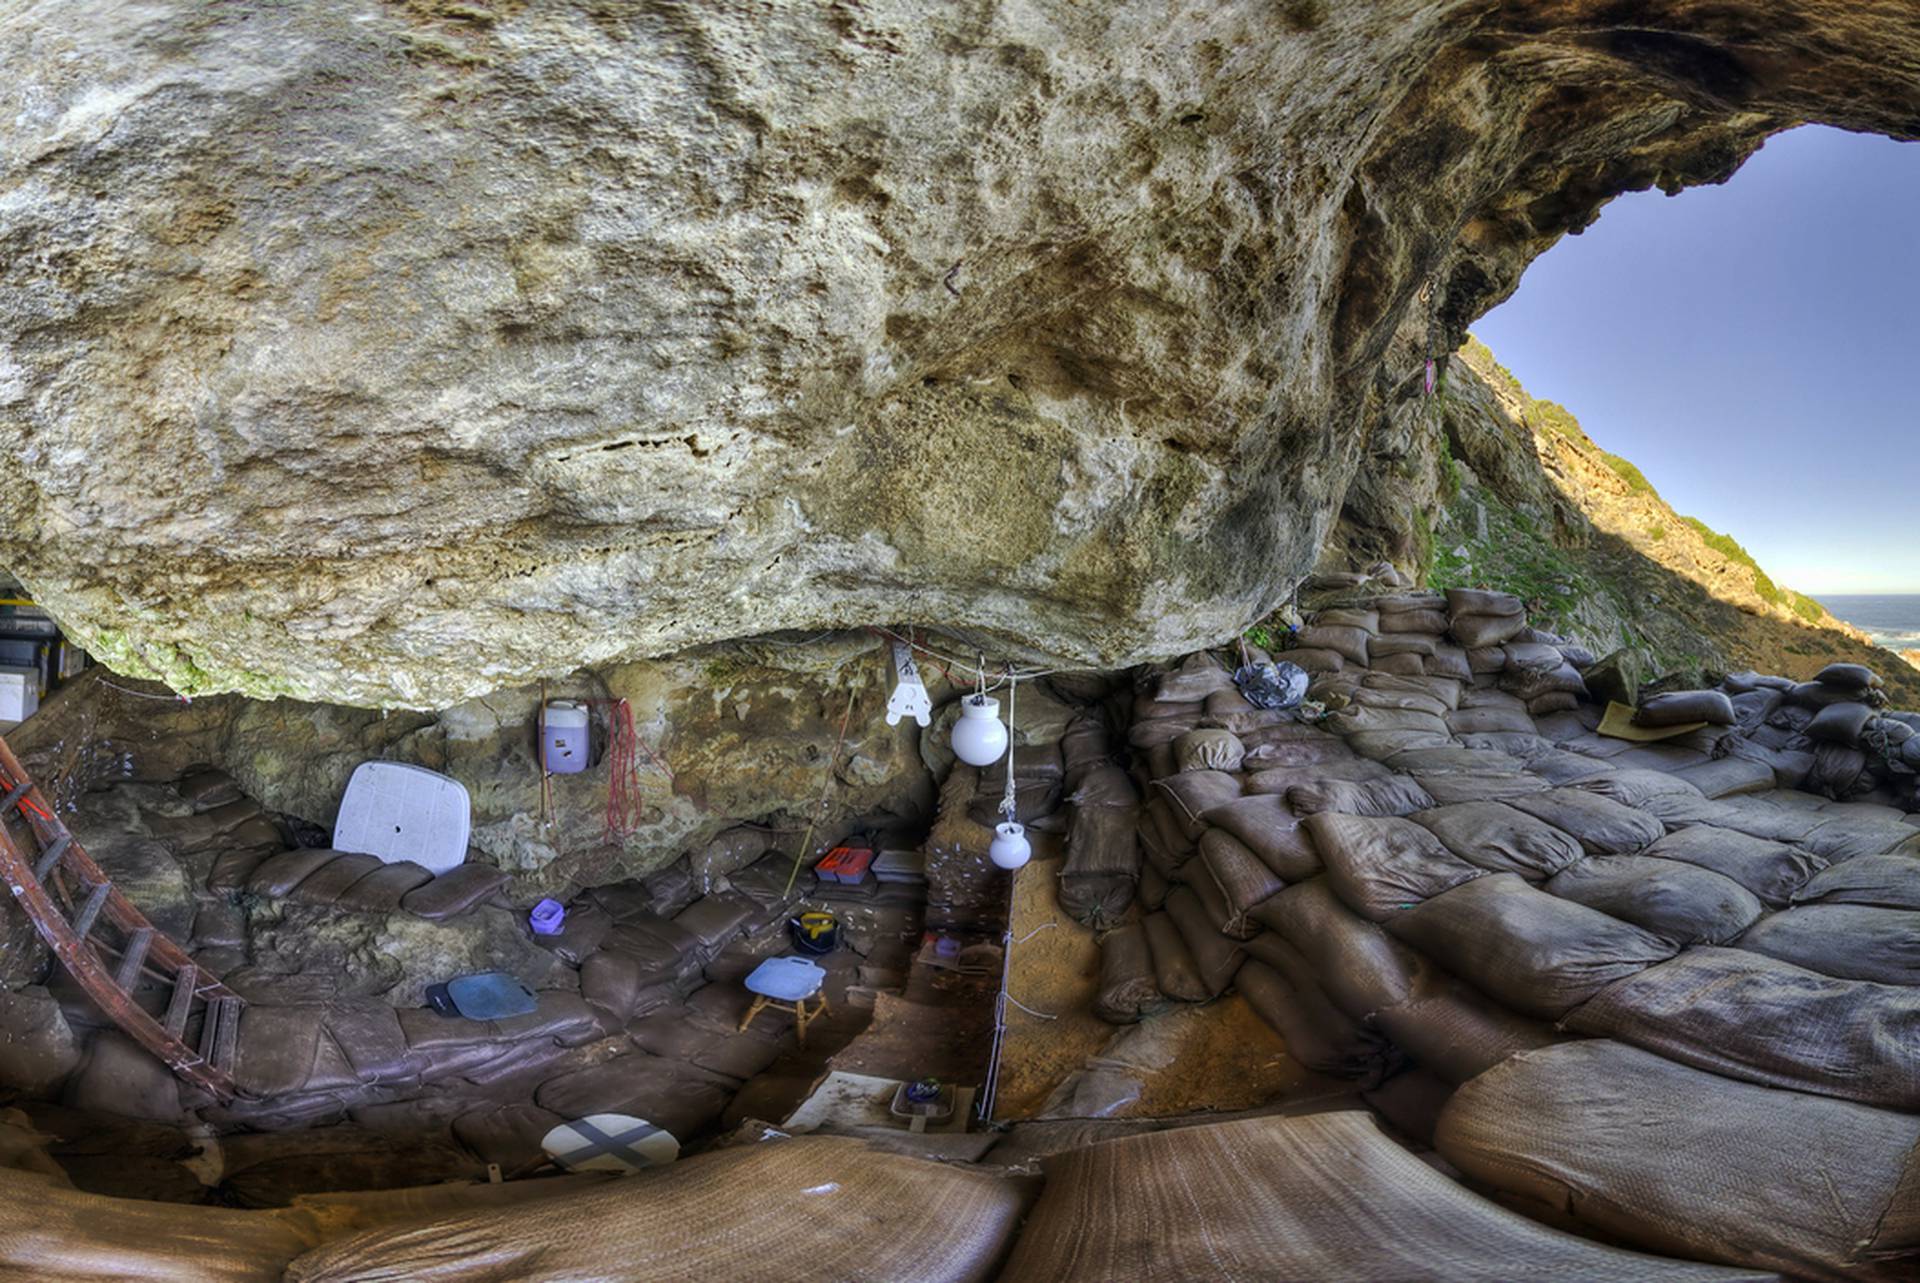 The interior of Blombos Cave on South Africa's southern coast